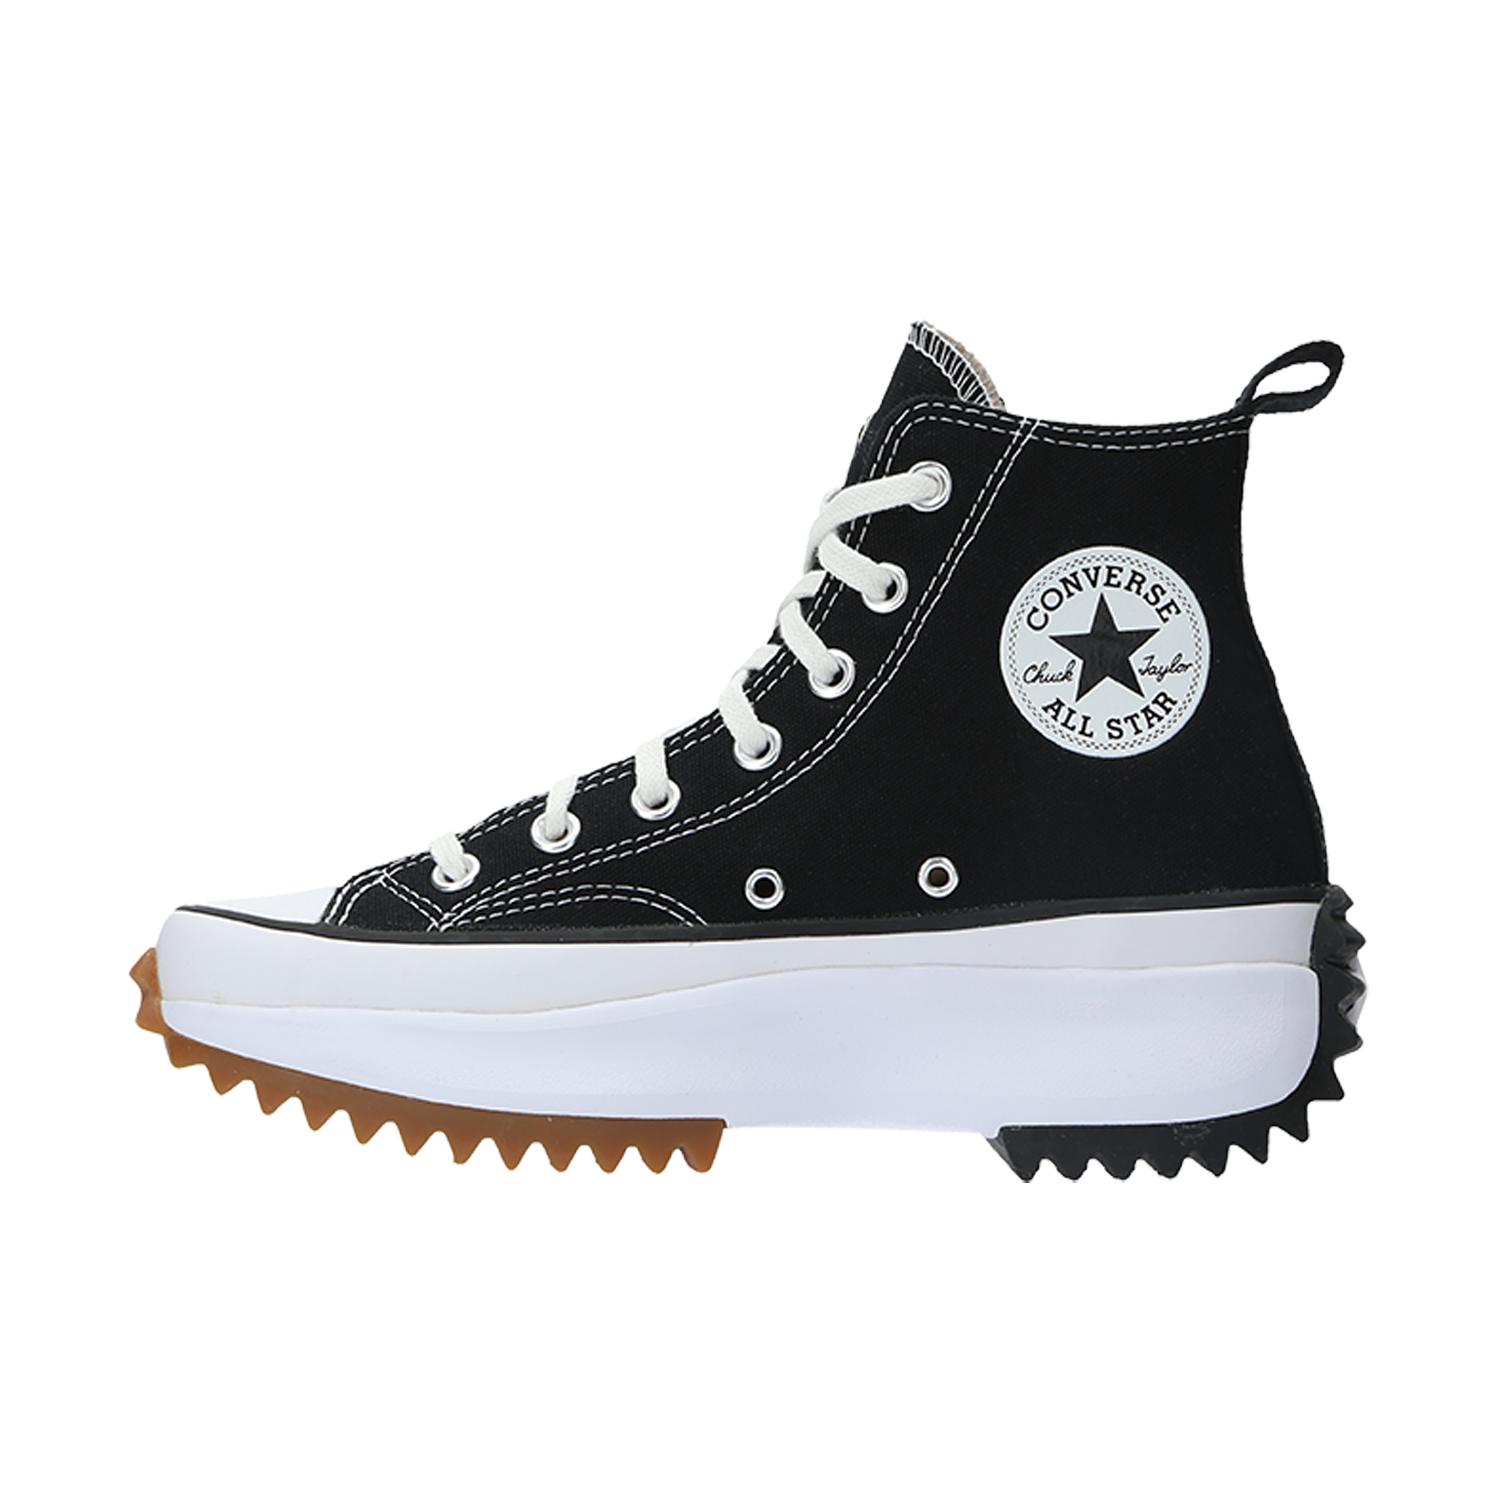 Converse Run Star Hike Hi Shoes in Black/White (Black) for Men - Save 76% |  Lyst